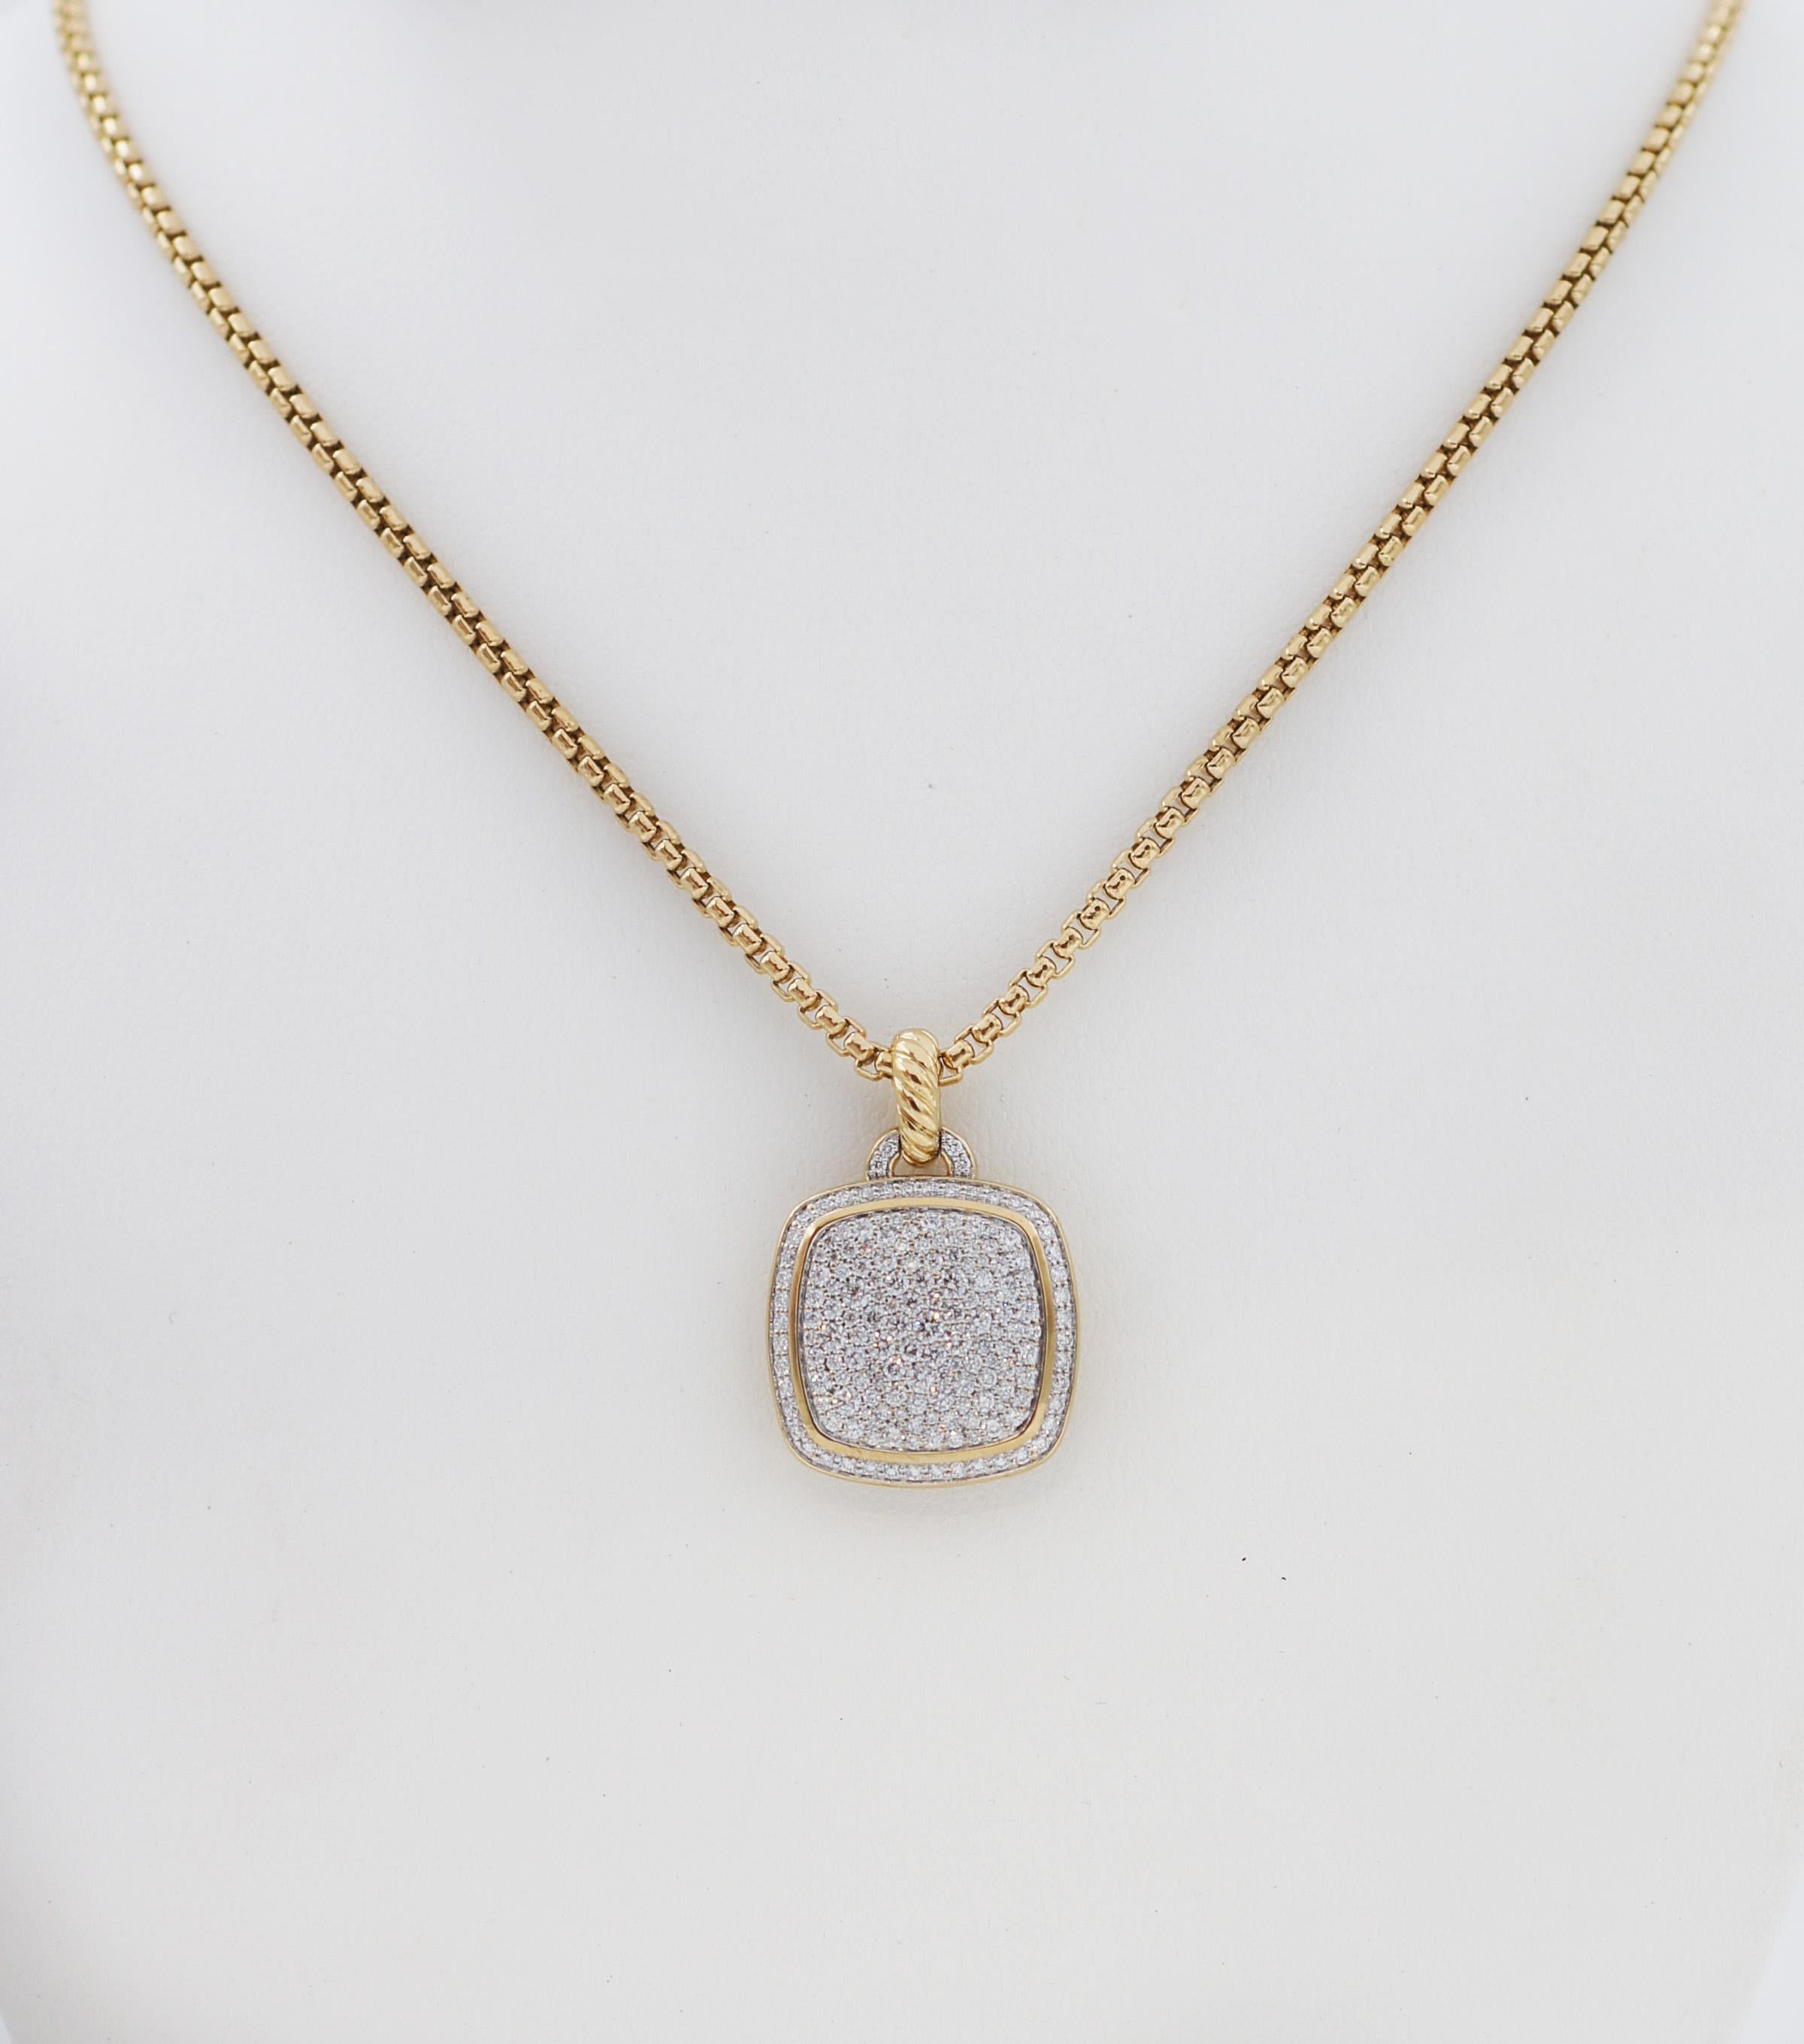 The Albion® Collection’s unique cushion-cut center stone or pave Diamonds in a refined modern setting with classical proportion
Details:
18-karat yellow gold
Pavé-set diamonds, Approx. 1.59 total carat weight
Pendant, 21.4mm (1